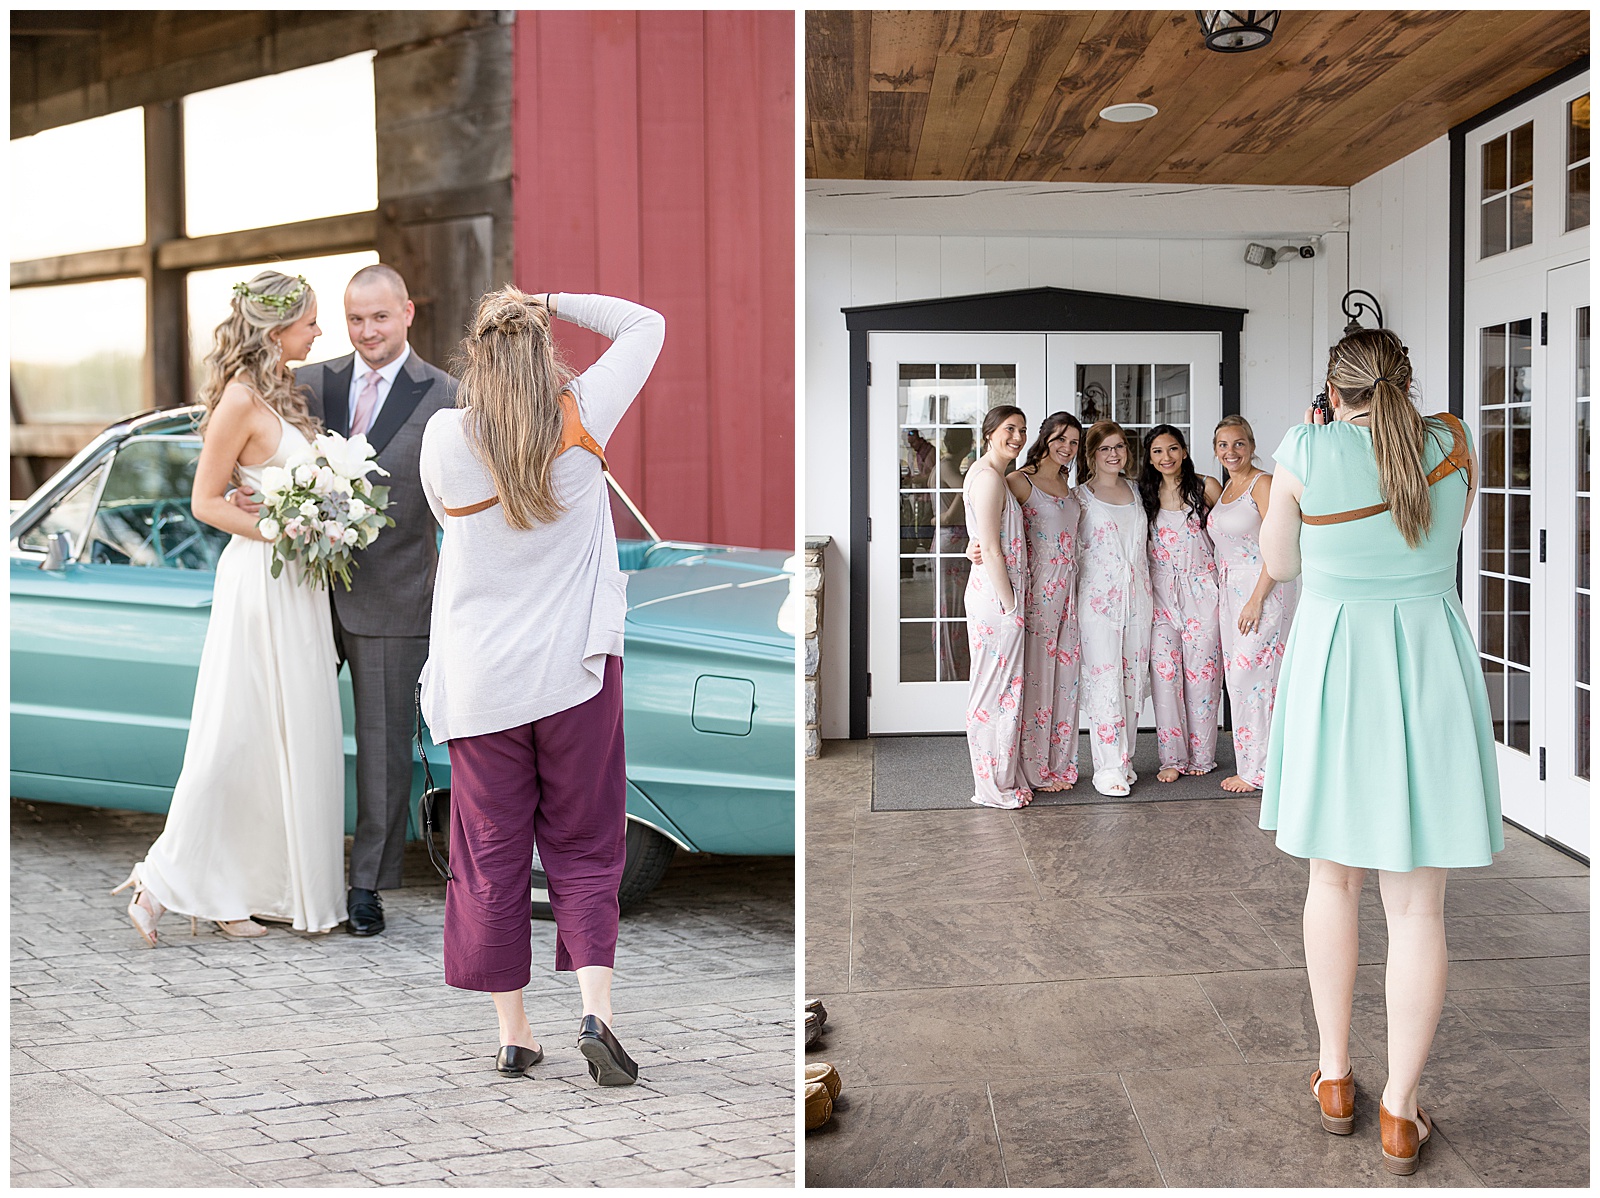 back of photographer as she snaps photos of bride with her bridesmaids on porch of barn property in pennsylvania before wedding ceremony